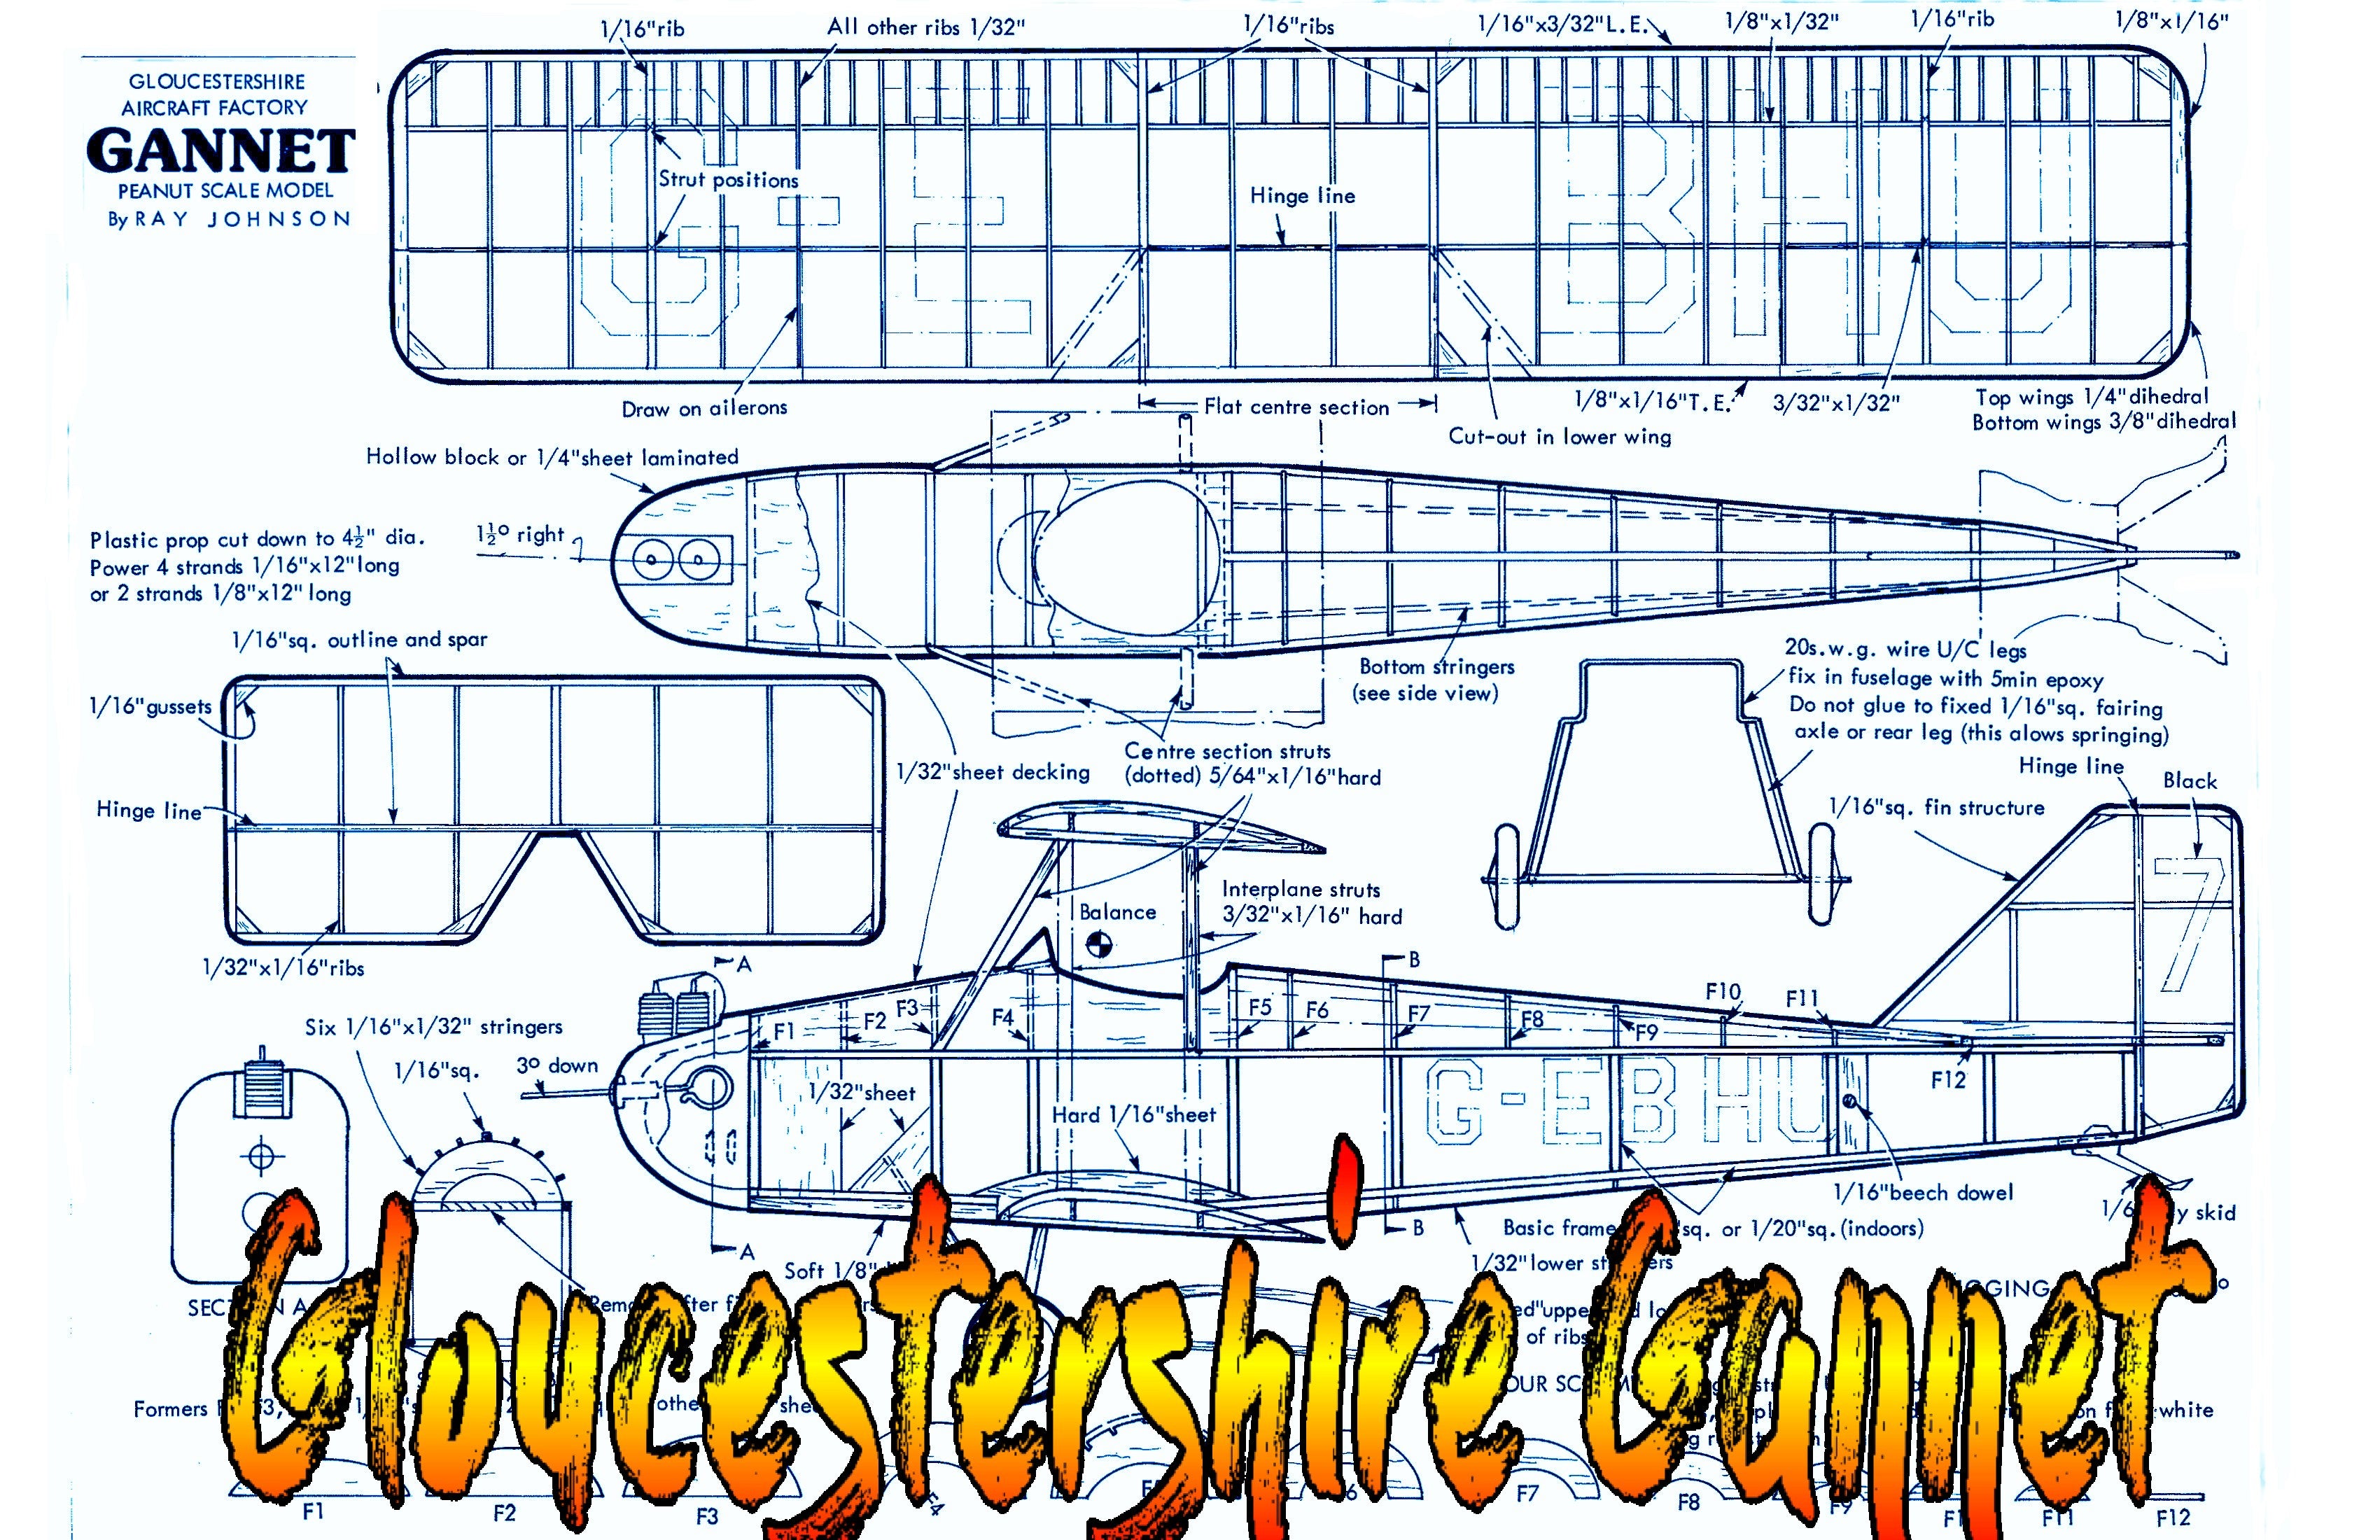 full size printed plans peanut scale "gloucestershire gannet" construction is quite straightforward